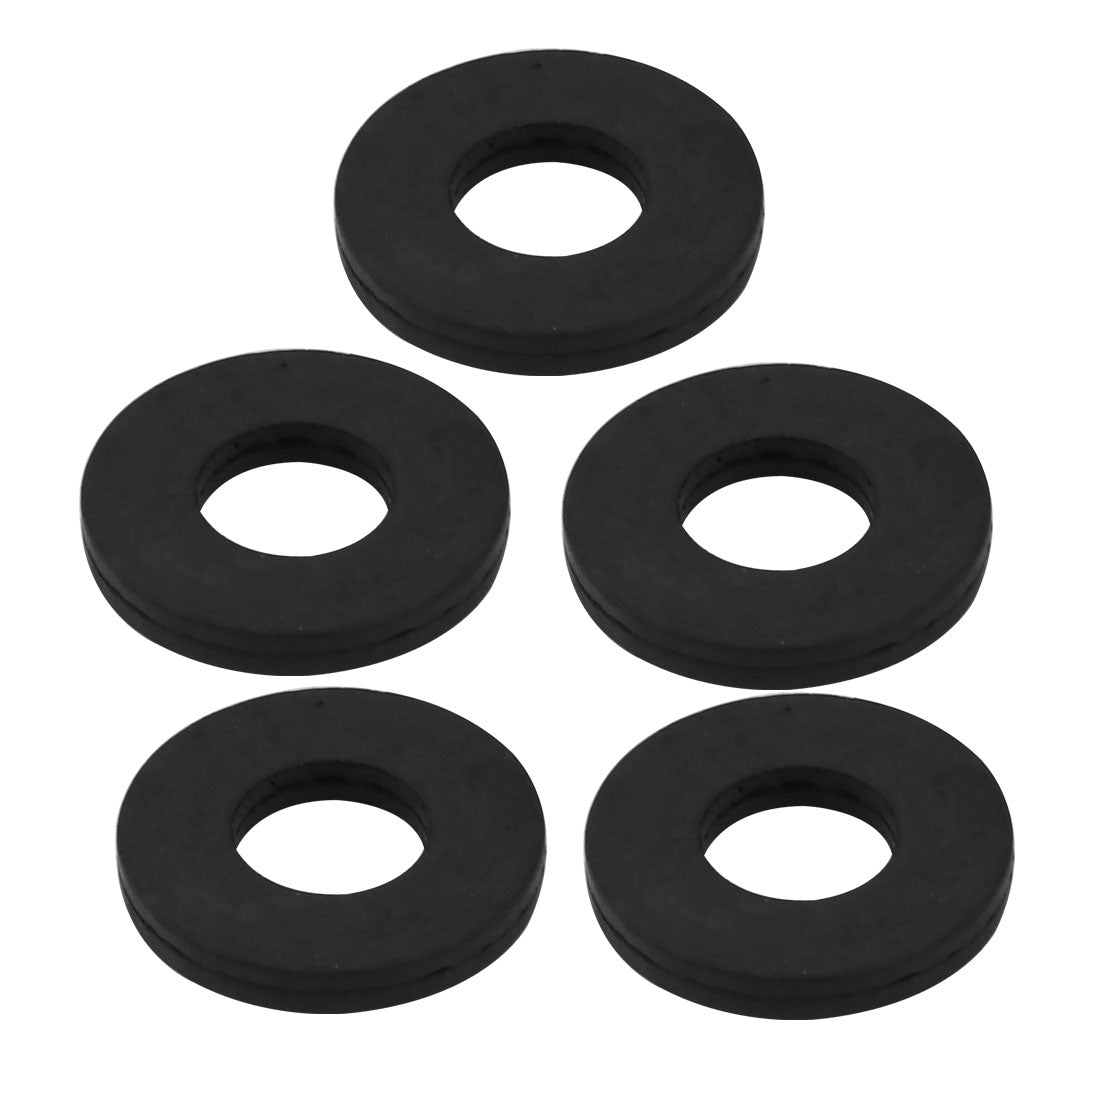 Uxcell Uxcell 5pcs Black Rubber Round Flat Washer Assortment Size 3x8x2mm Flat Washer